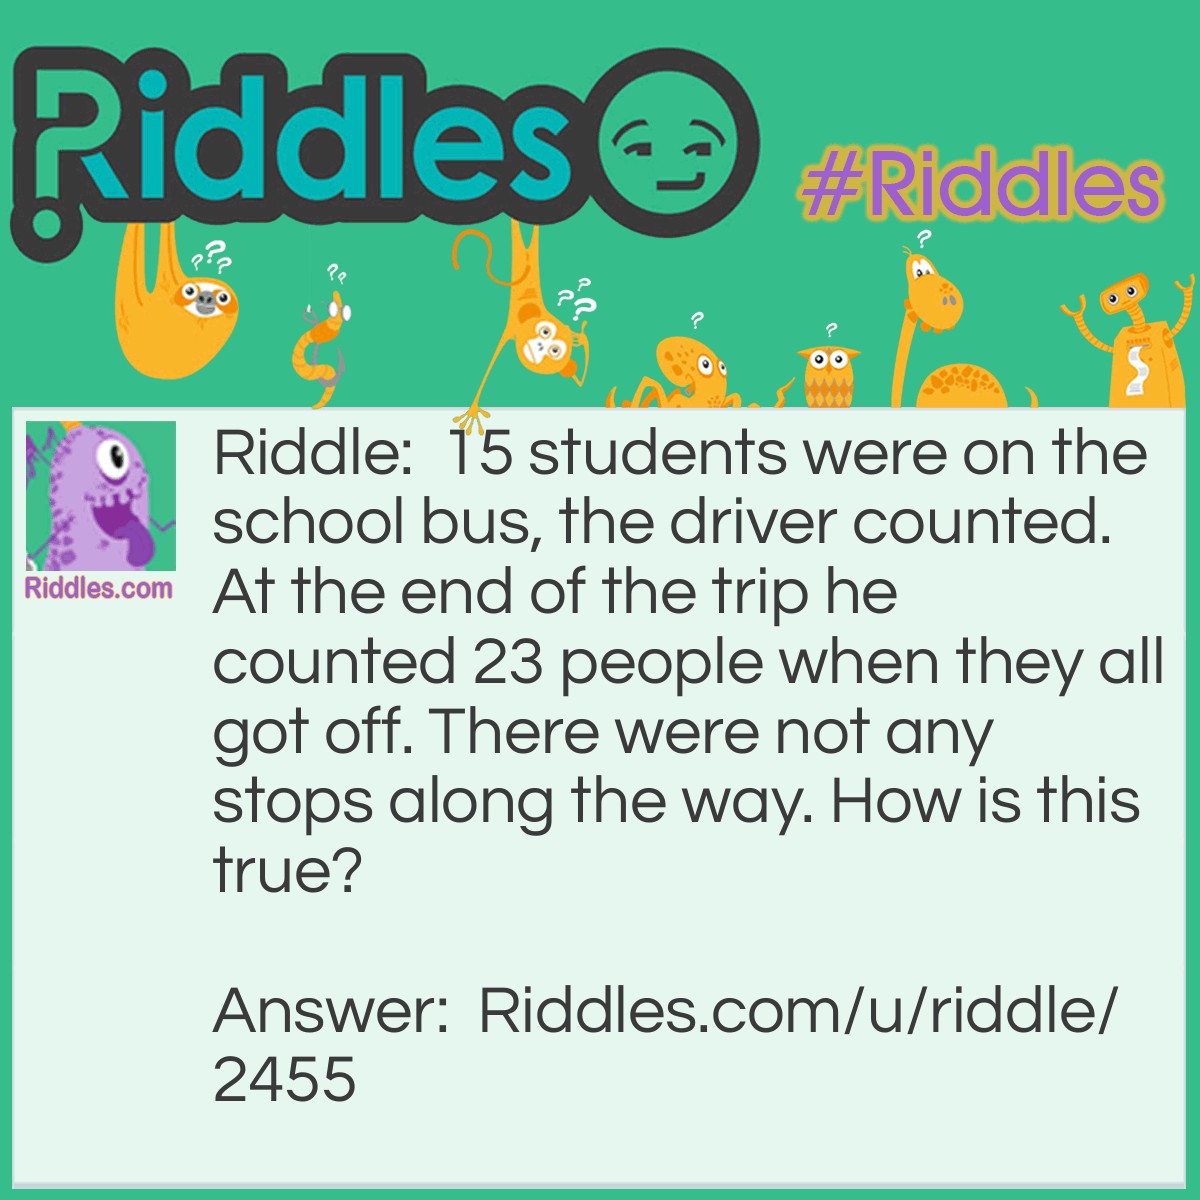 Riddle: 15 students were on the school bus, the driver counted. At the end of the trip he counted 23 people when they all got off. There were not any stops along the way. How is this true? Answer: The driver counted 15 students when they got on. On the way they said she had to count the adults so at the end she counted all the people and in total there were 15 students and 8 adults, 23 people.